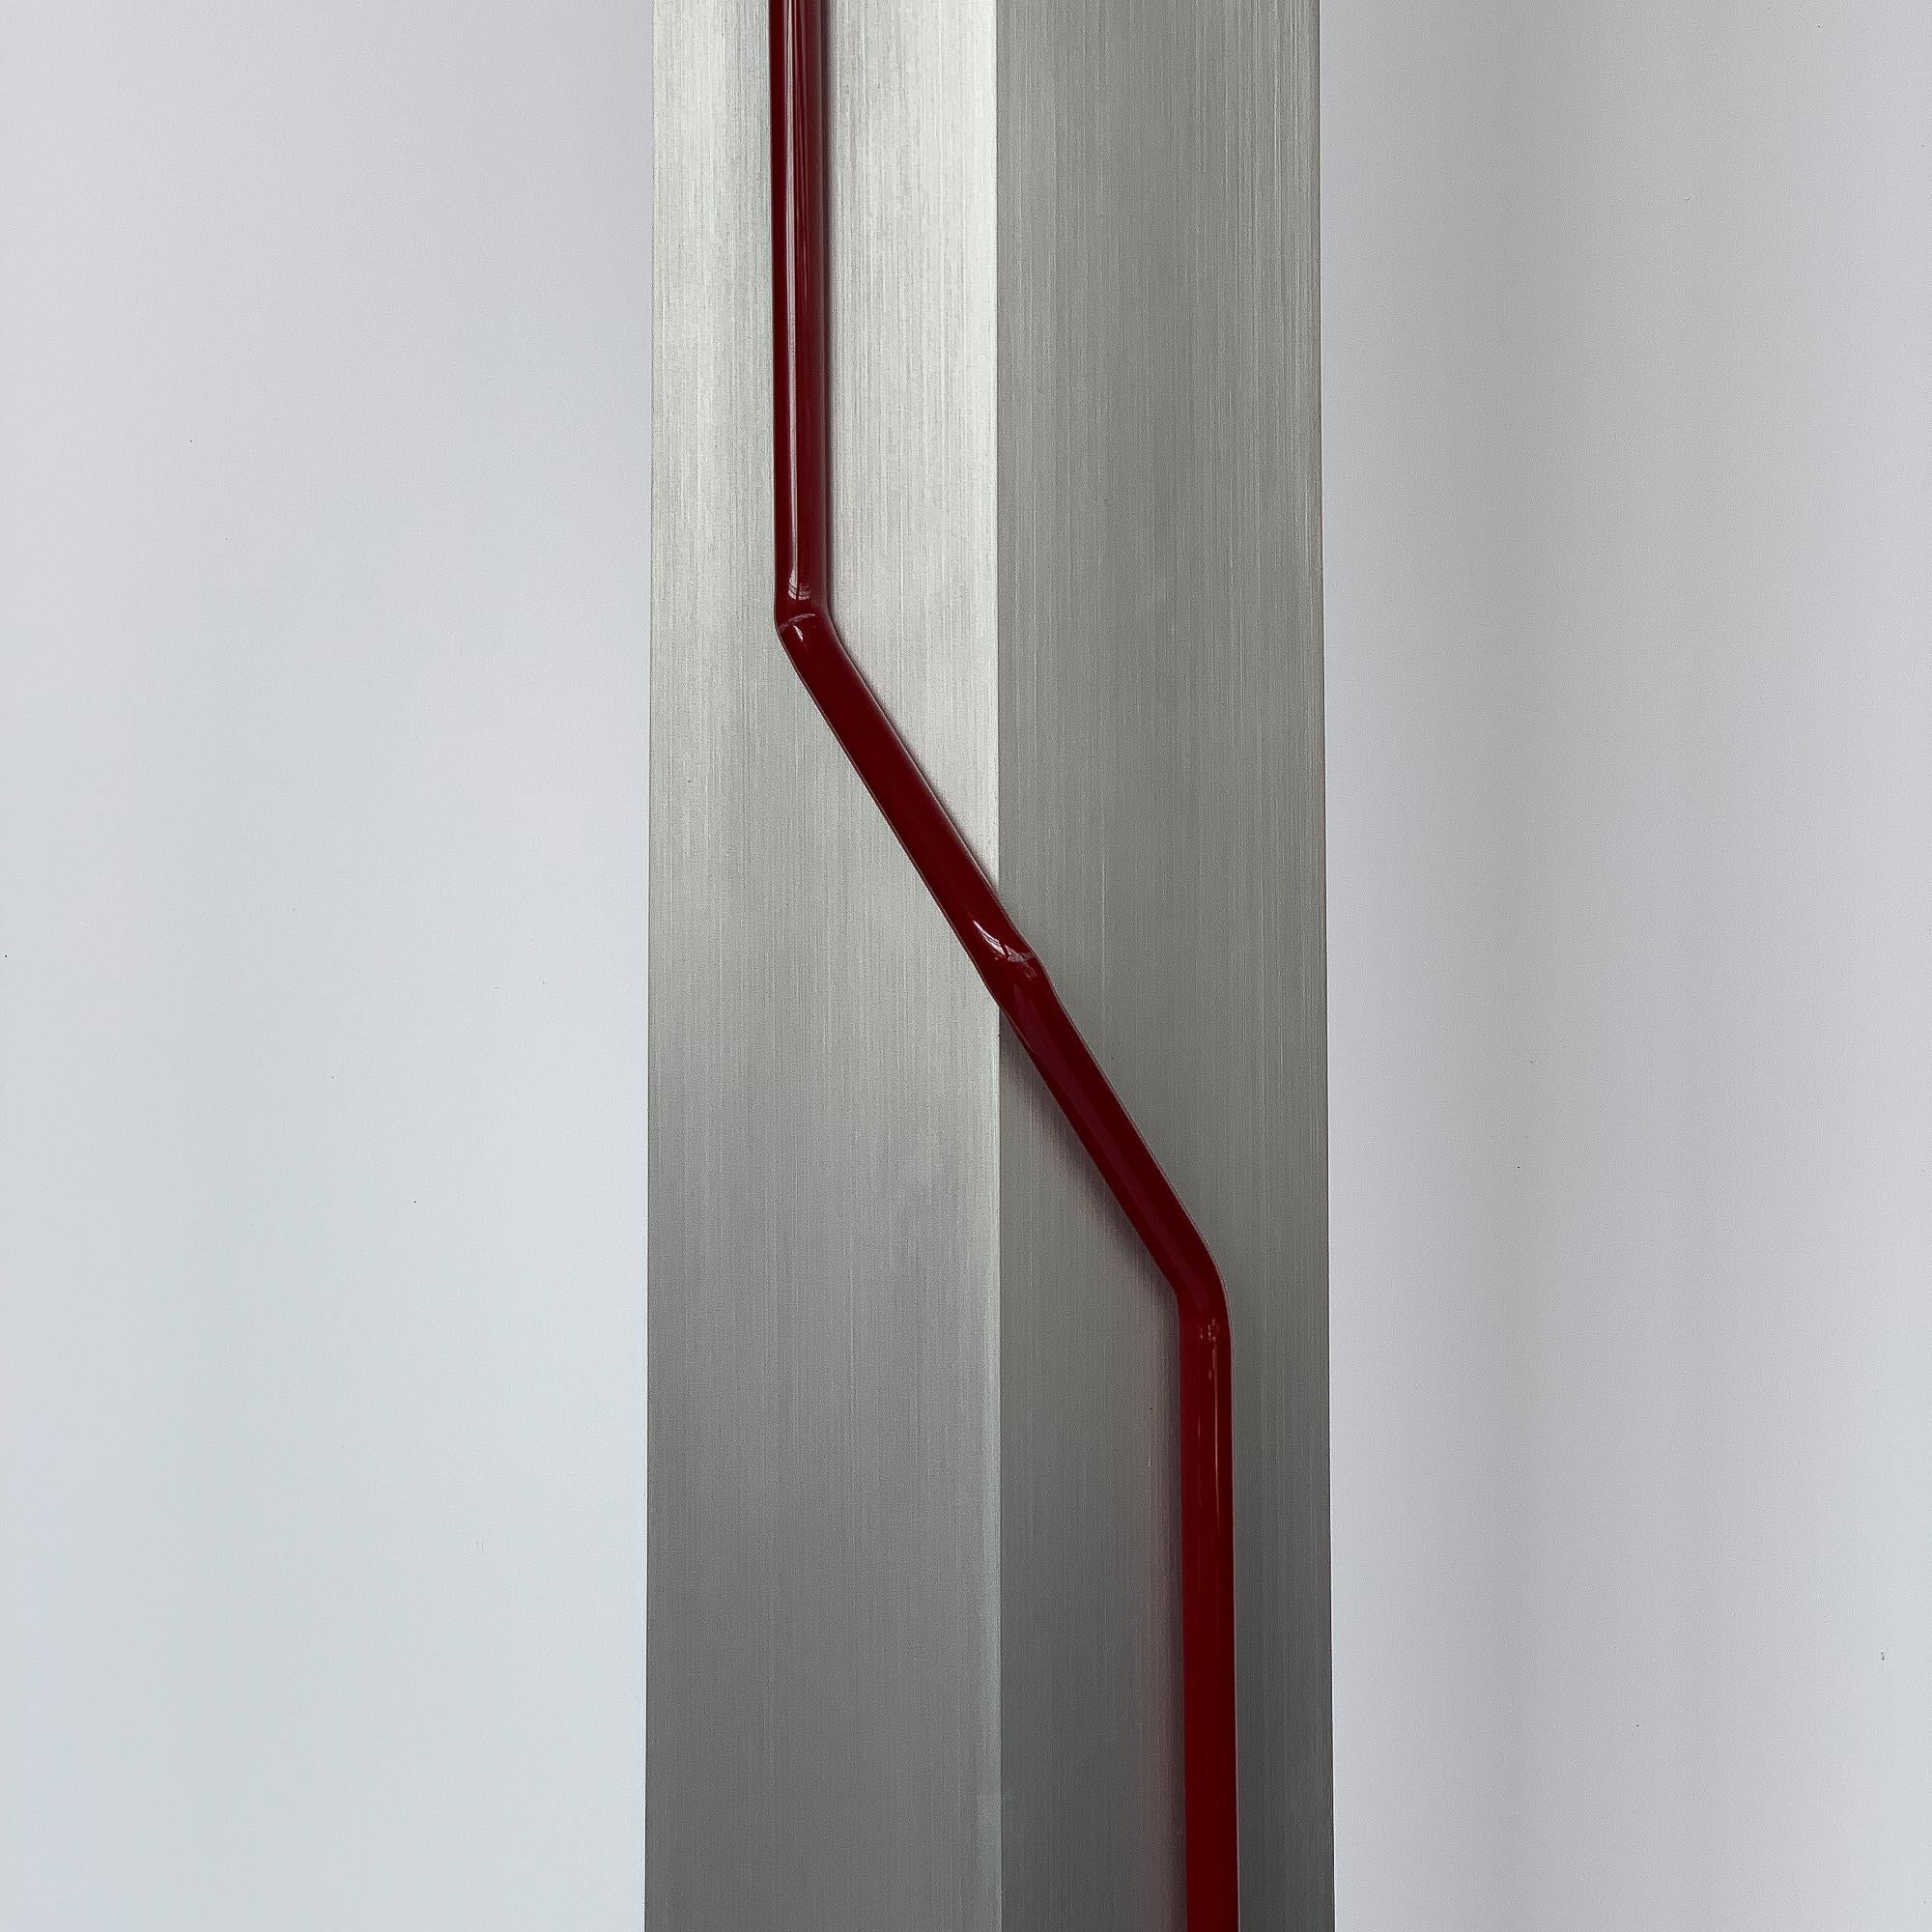 Rare Red Neon and Aluminum Floor Lamp by Rudi Stern and Don Chelsea for Kovacs 2